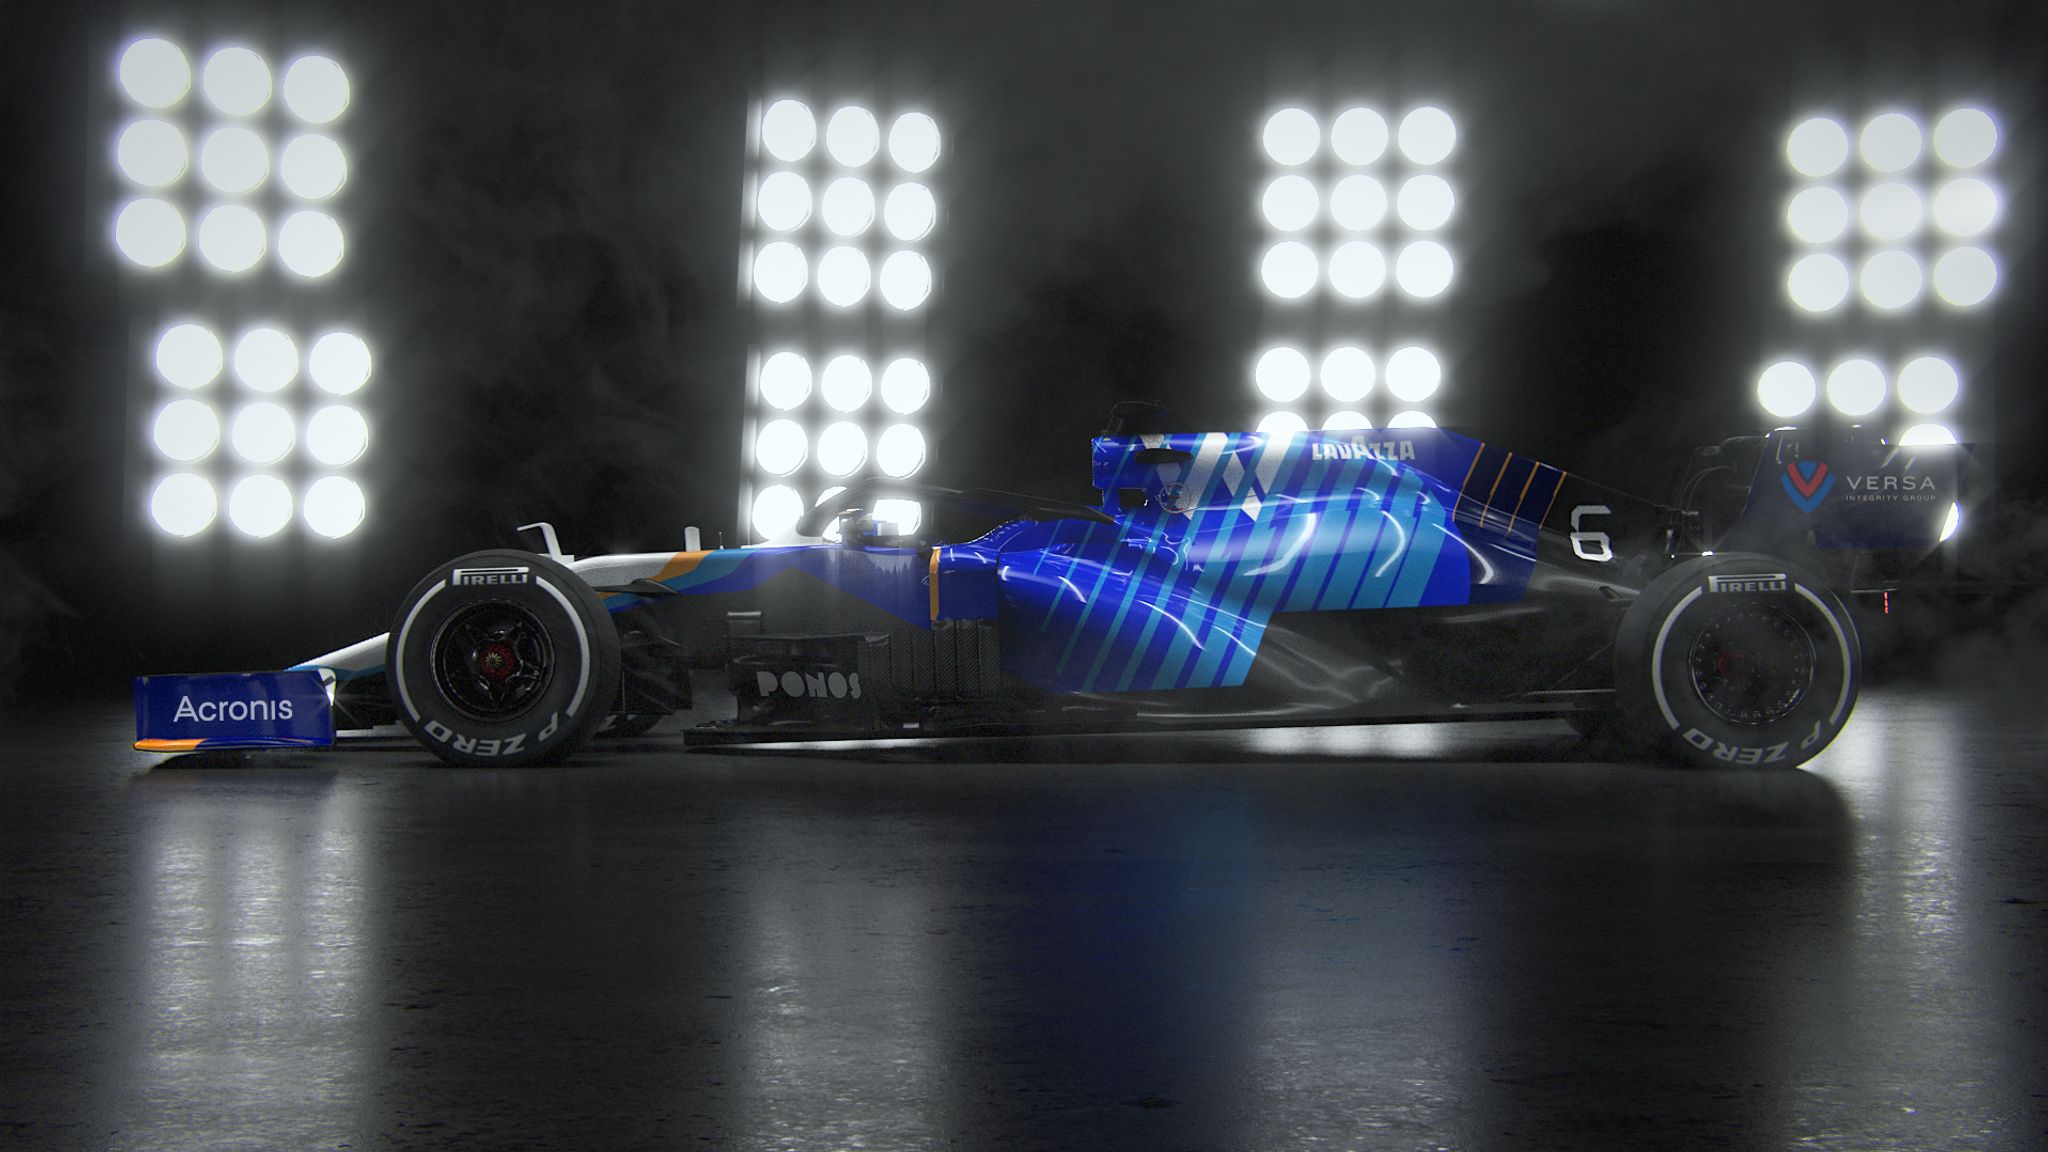 Williams reveal new look for F1 2021 with FW43B car images online 